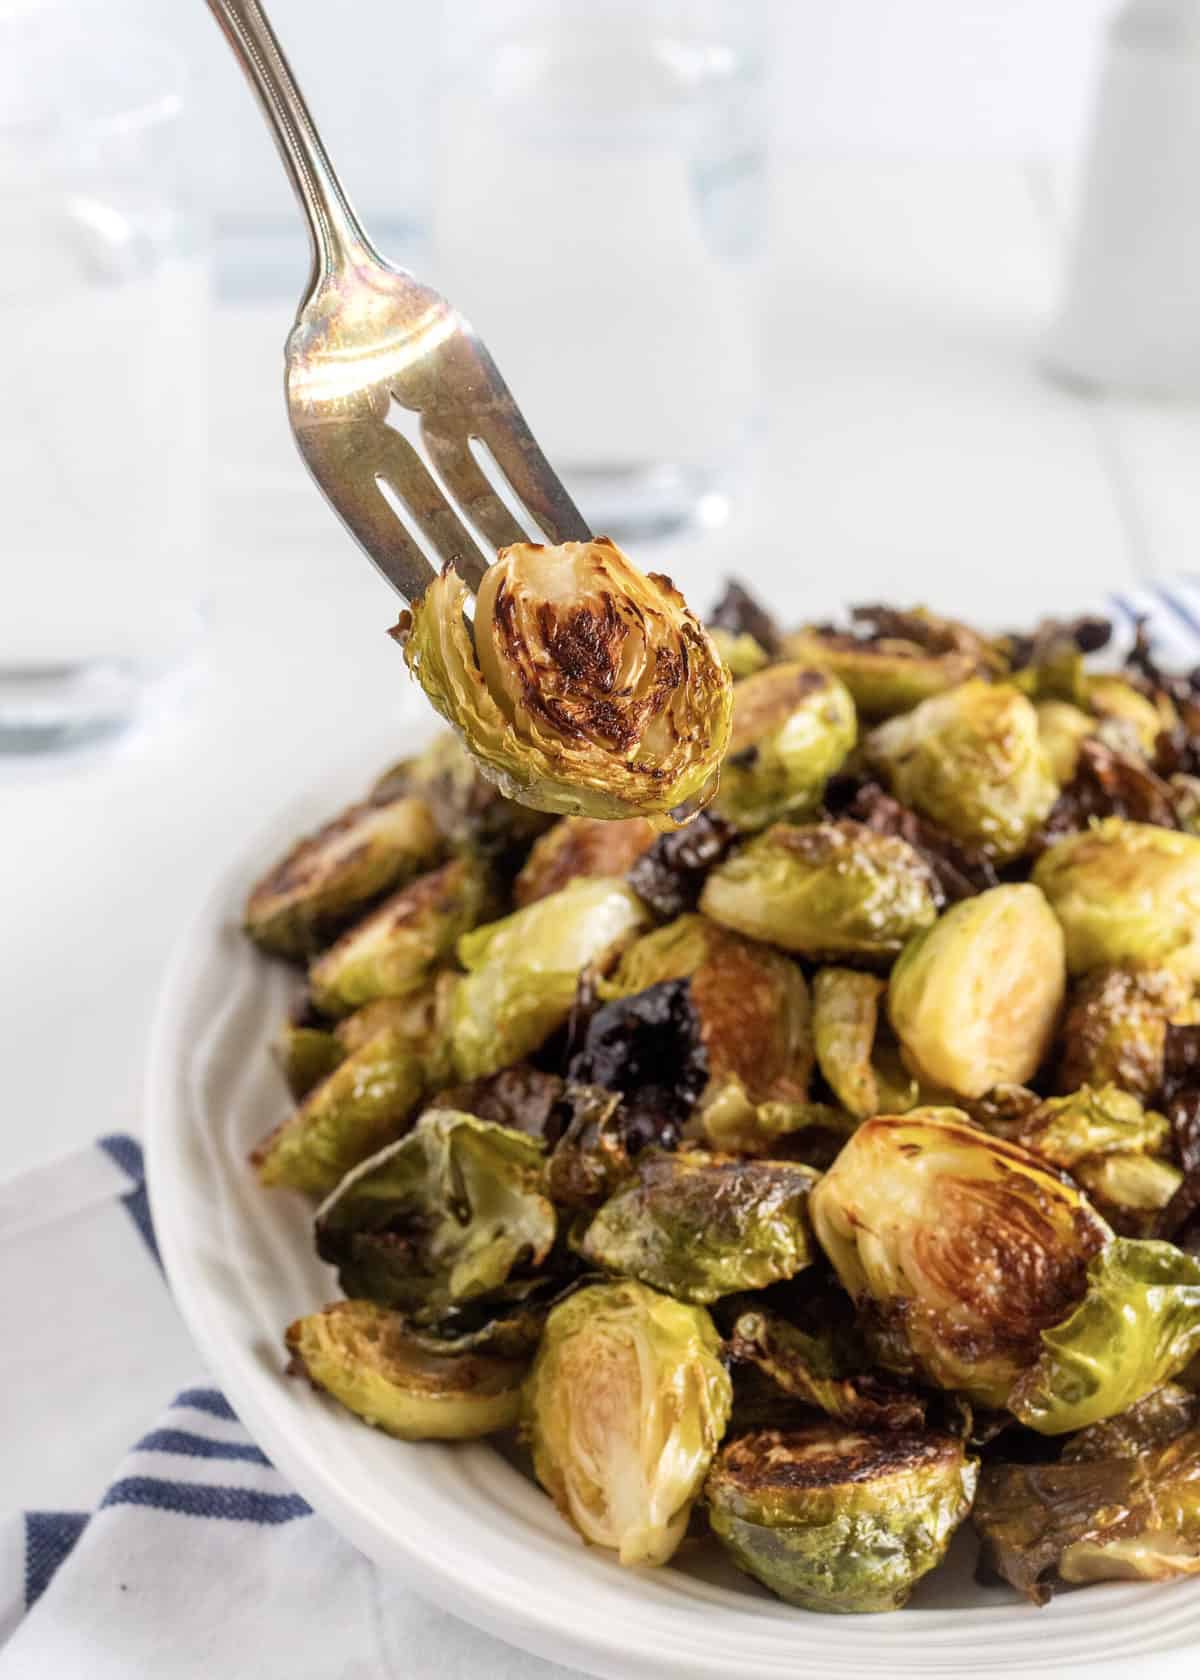 Bowl of Roasted Brussels Sprouts by The BakerMama